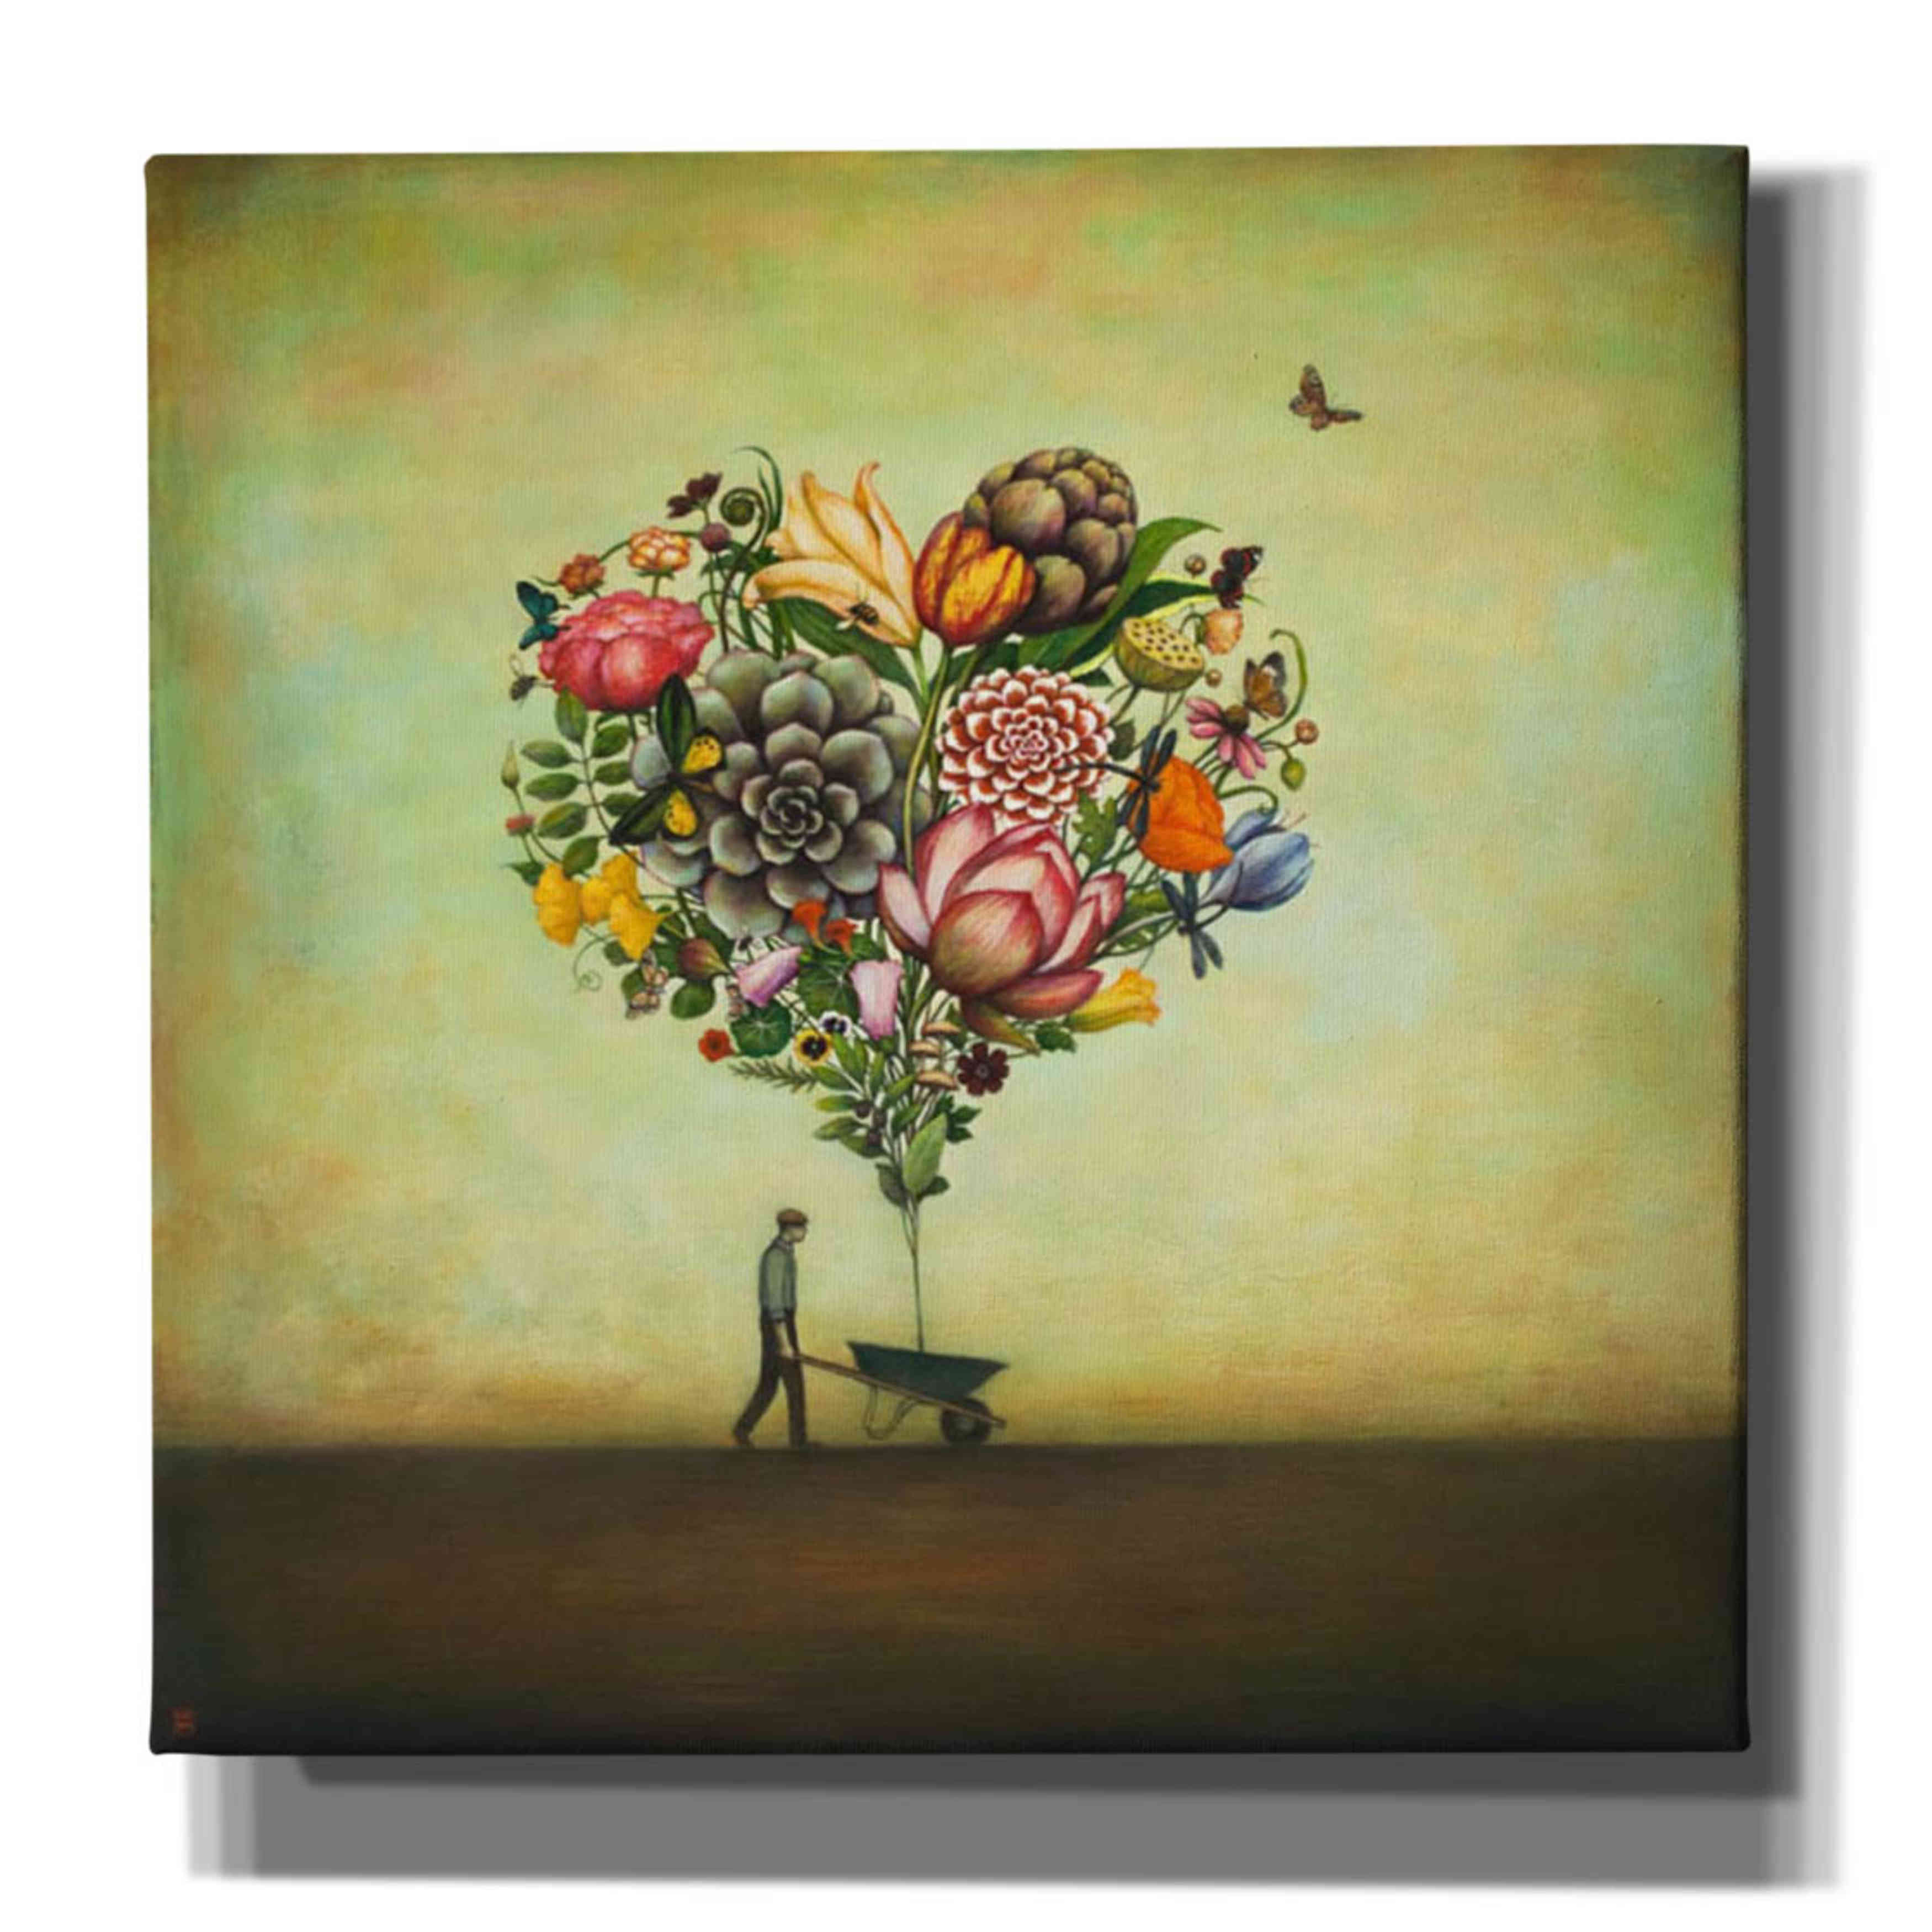 Giclee Canvas Wall Art Epic Graffiti /'Big Heart Botany/' by Duy Huynh